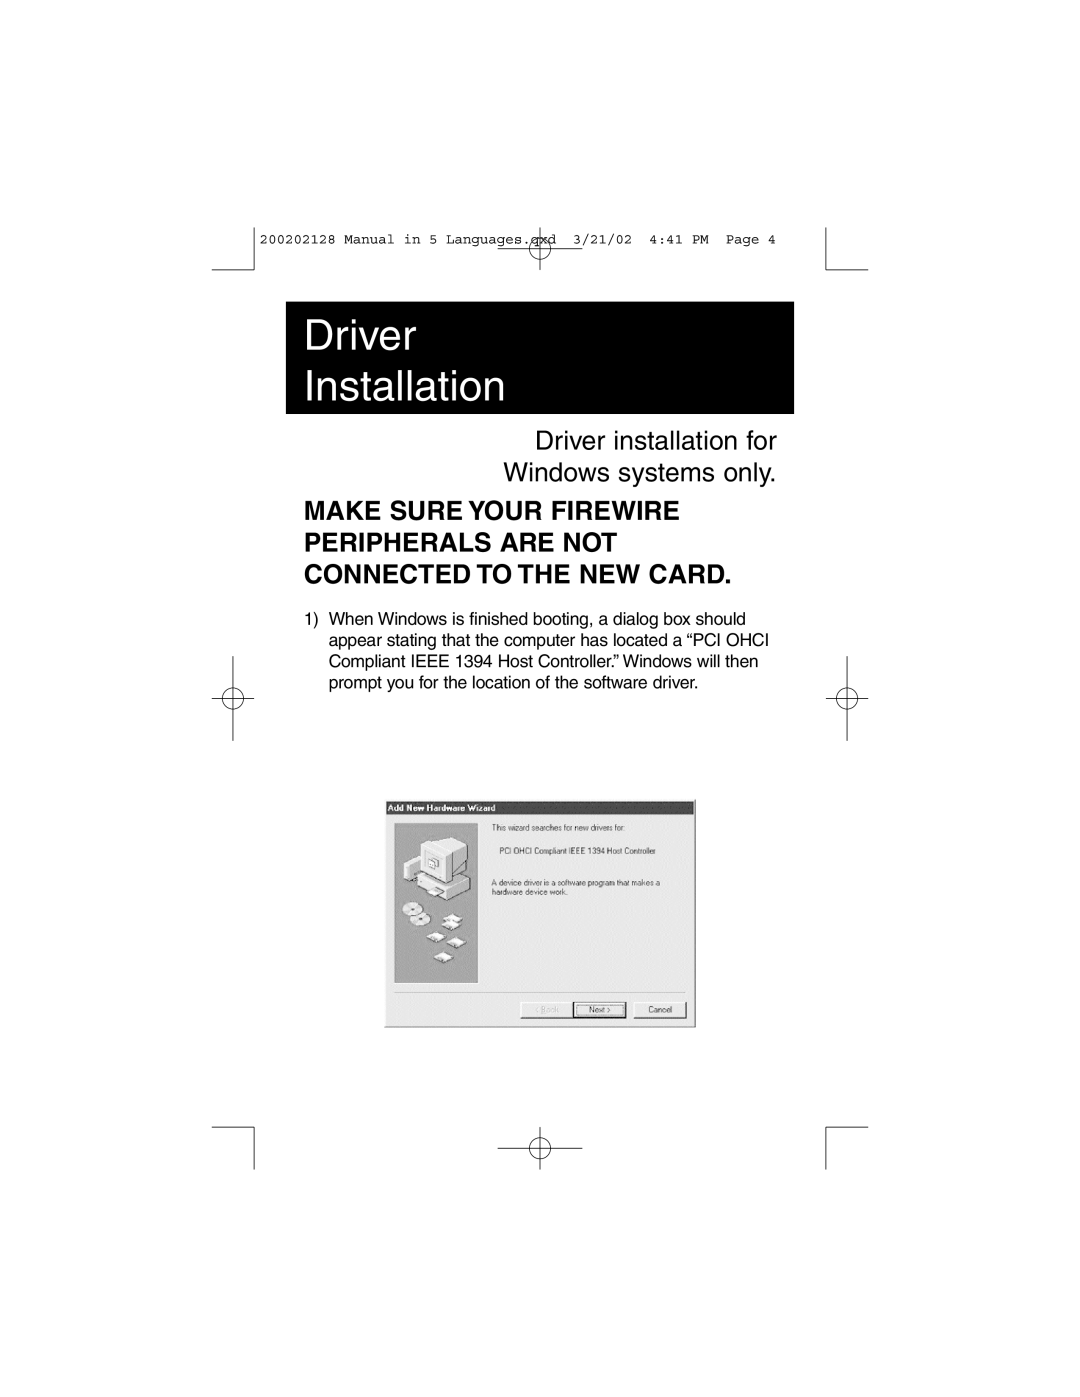 Tripp Lite F200-003-R user manual Driver Installation, Driver installation for Windows systems only 